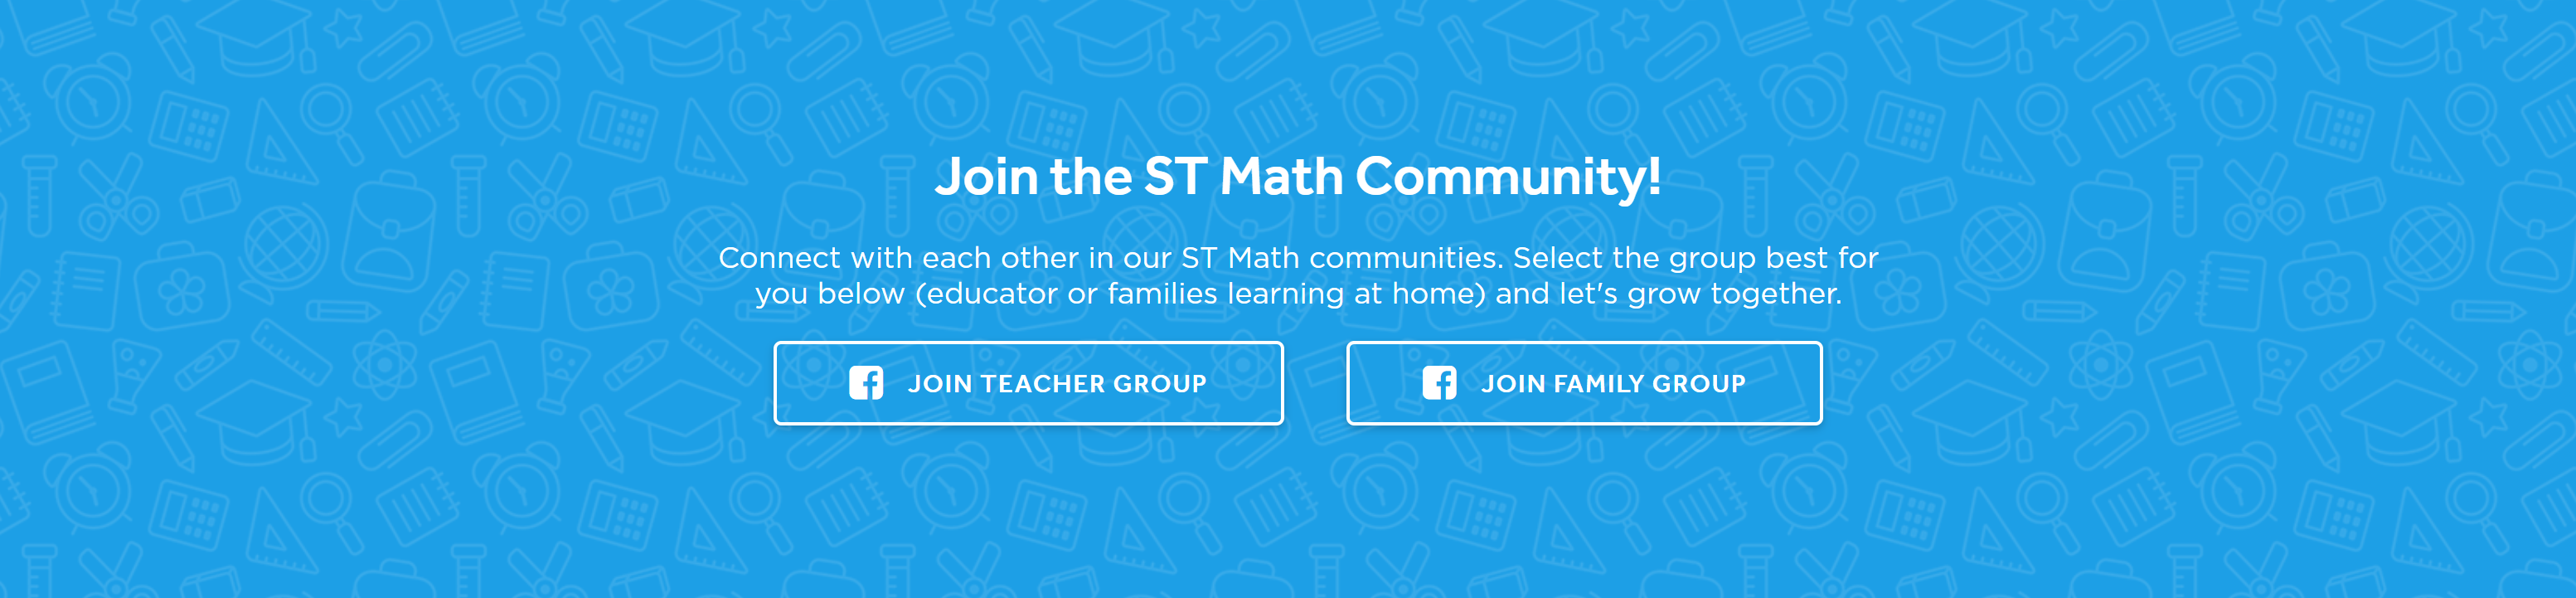 st-math-community-instruction-resources-page